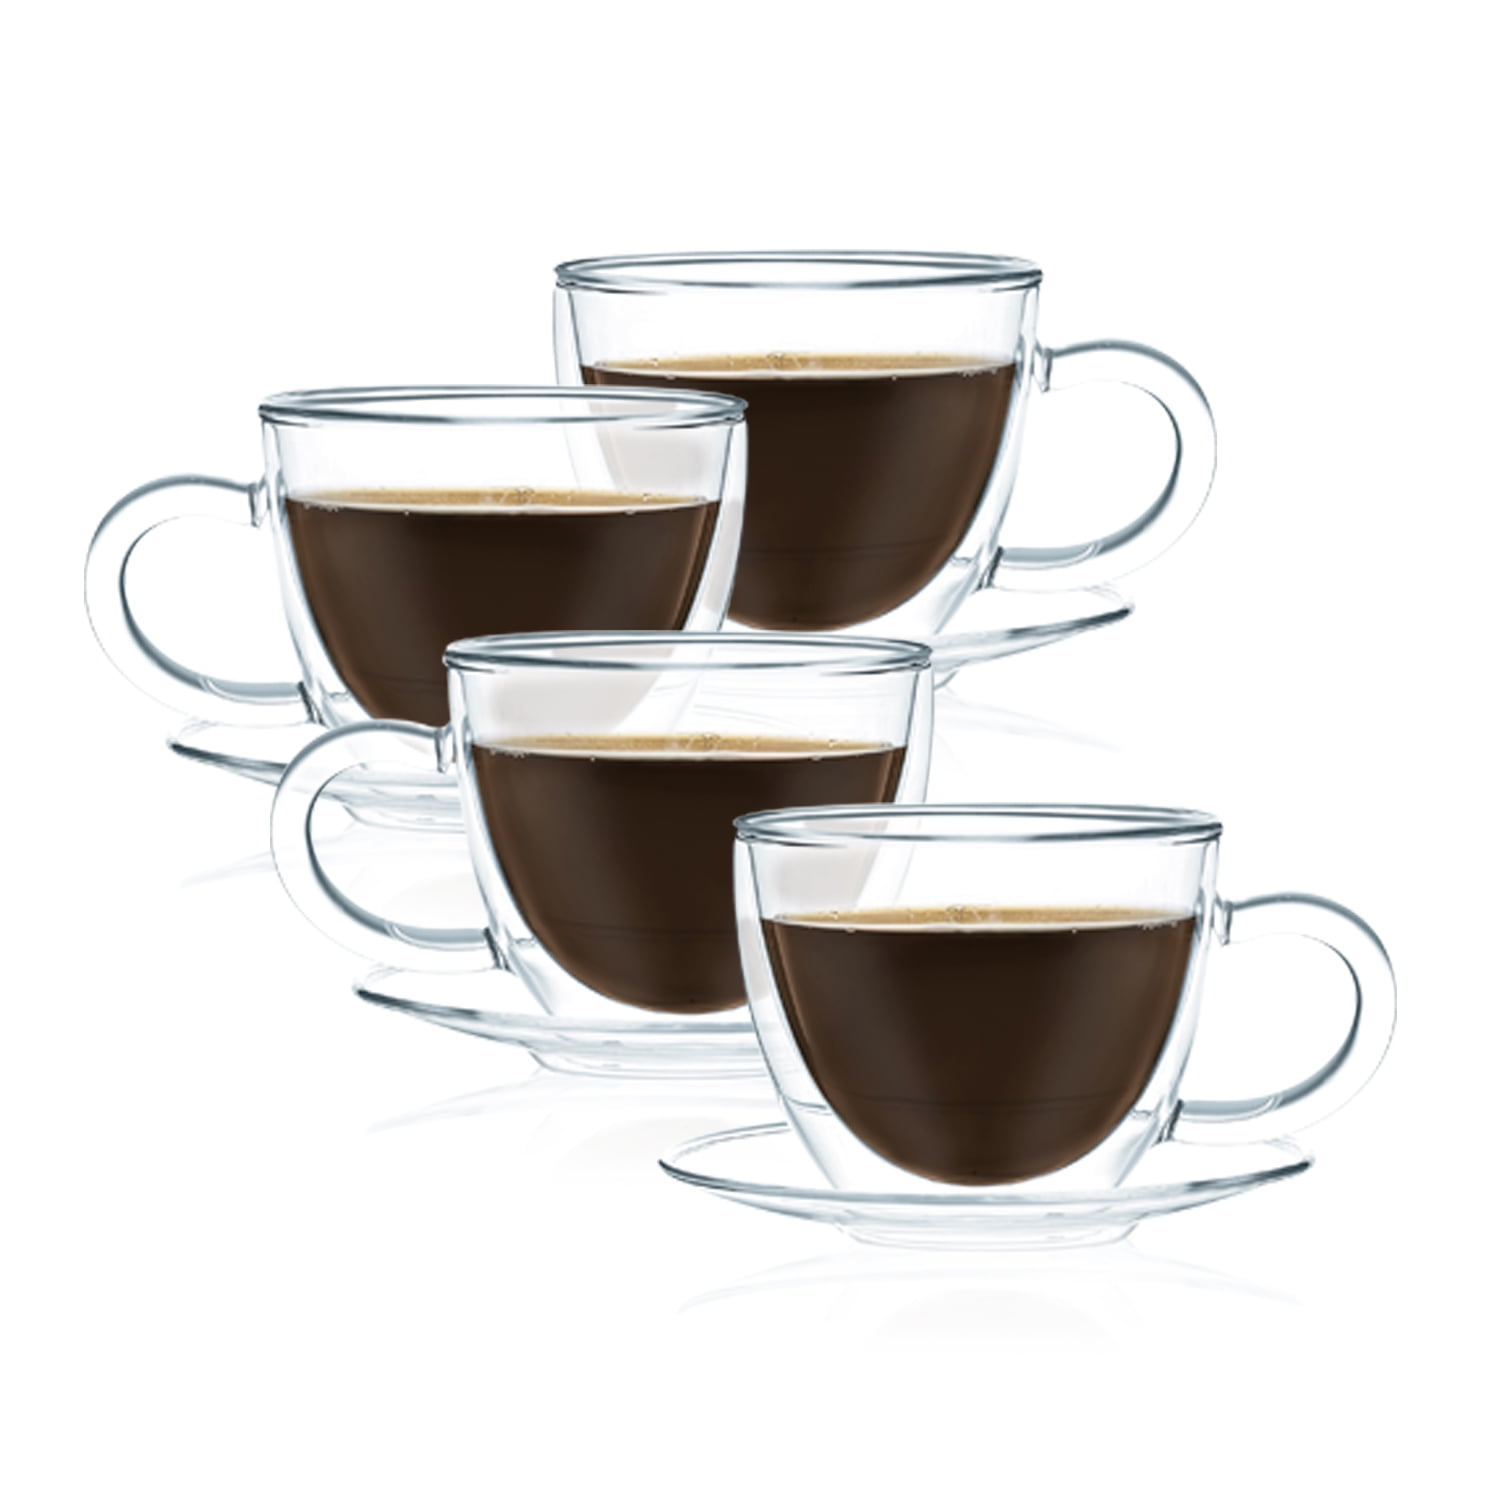 Volarium Tea Cups and Saucers Sets, 6PCs Clear Glass Coffee  Mugs and 6PCs Glass Saucers, Ideal 6.5 Ounce Size for Cappuccino, Specialty  Coffee Drinks, Latte, Cafe Mocha and Tea: Cup